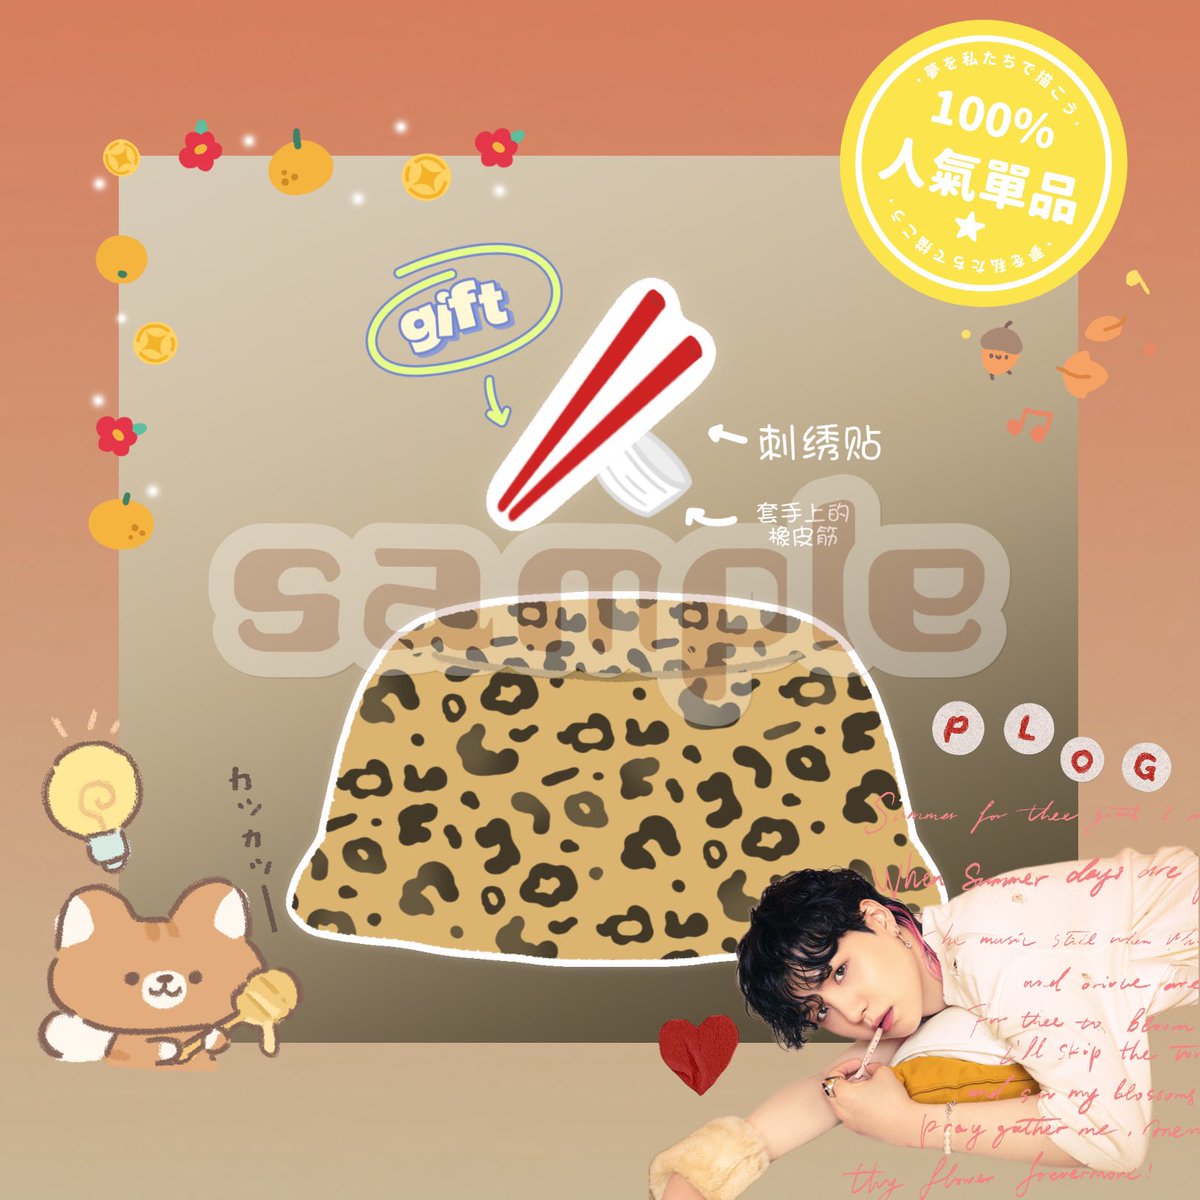 🤗[ℝ𝕖𝕔𝕠𝕞𝕞𝕖𝕟𝕕𝕒𝕥𝕚𝕠𝕟]🤗
Name: D-Day (by @yukibts0613)
Type: more details ⏬
▪️D-Day
▪️Leopard Plush Hat

Availability: Preorder, closes 15 May, 6pm.

📲 Get matching fits with Suga!